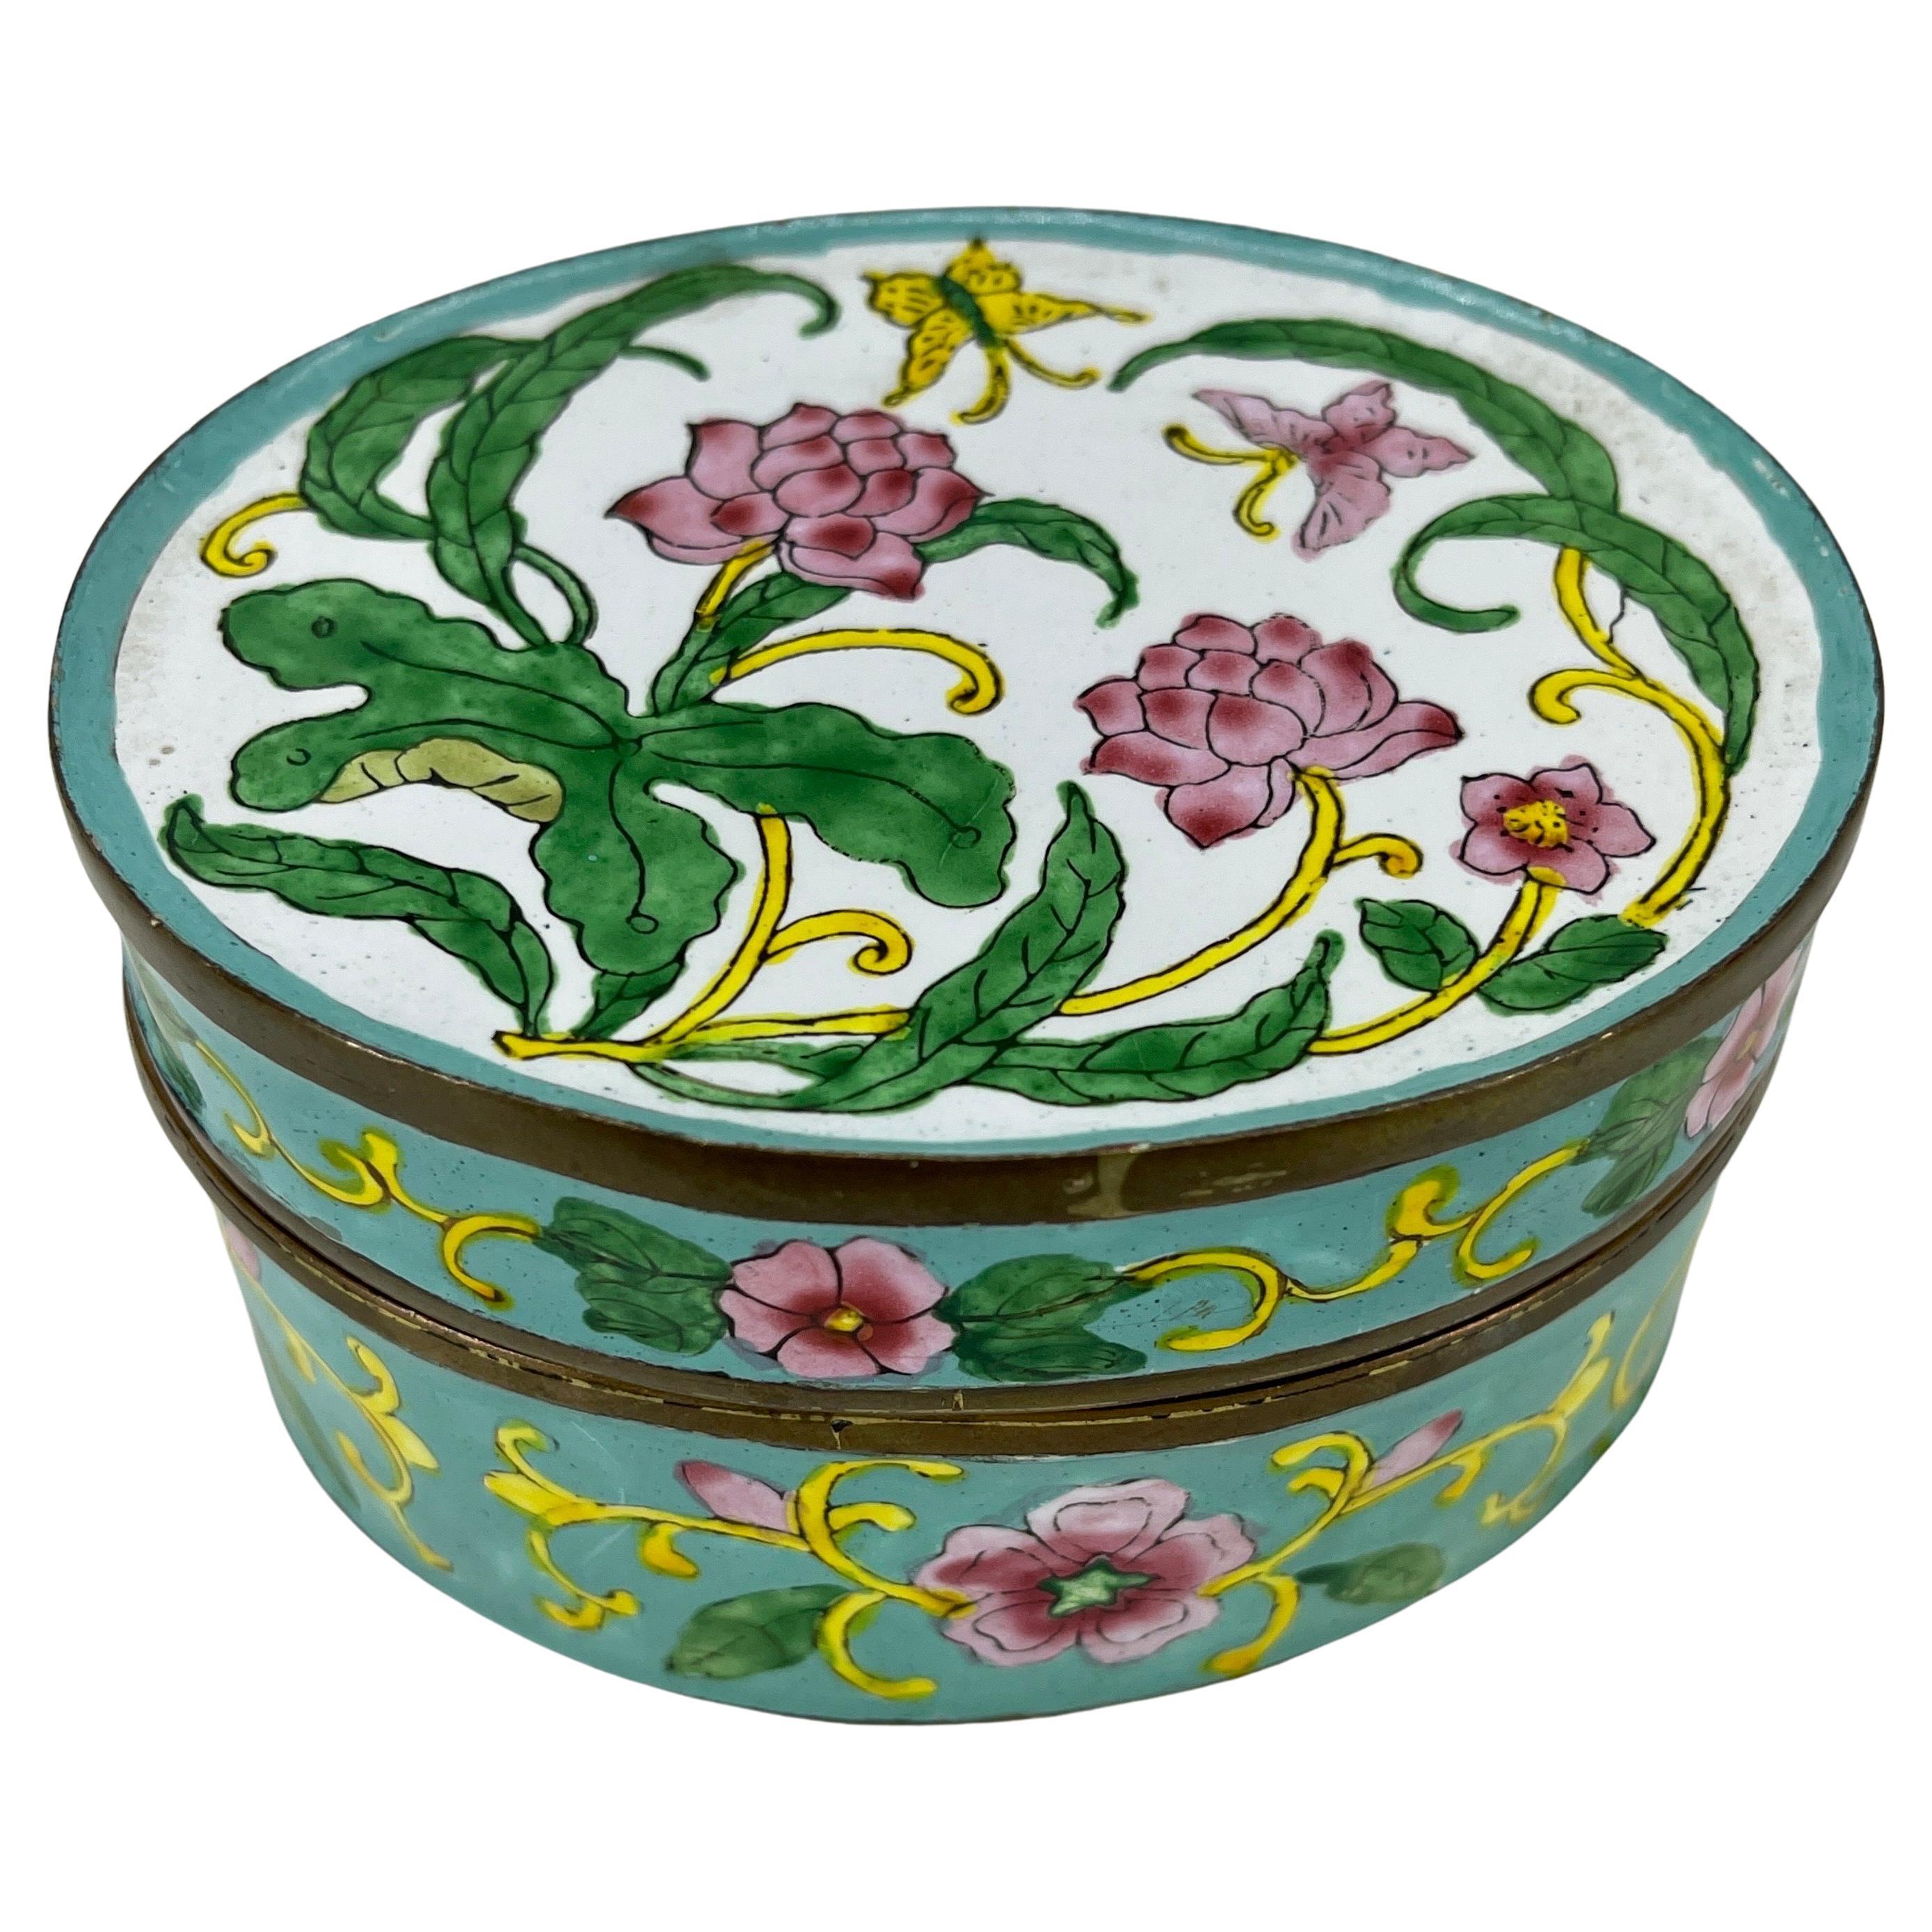 20th Century Oval Flower Decorated Cloisonné Enamel Jewelry Box, China, 1920's